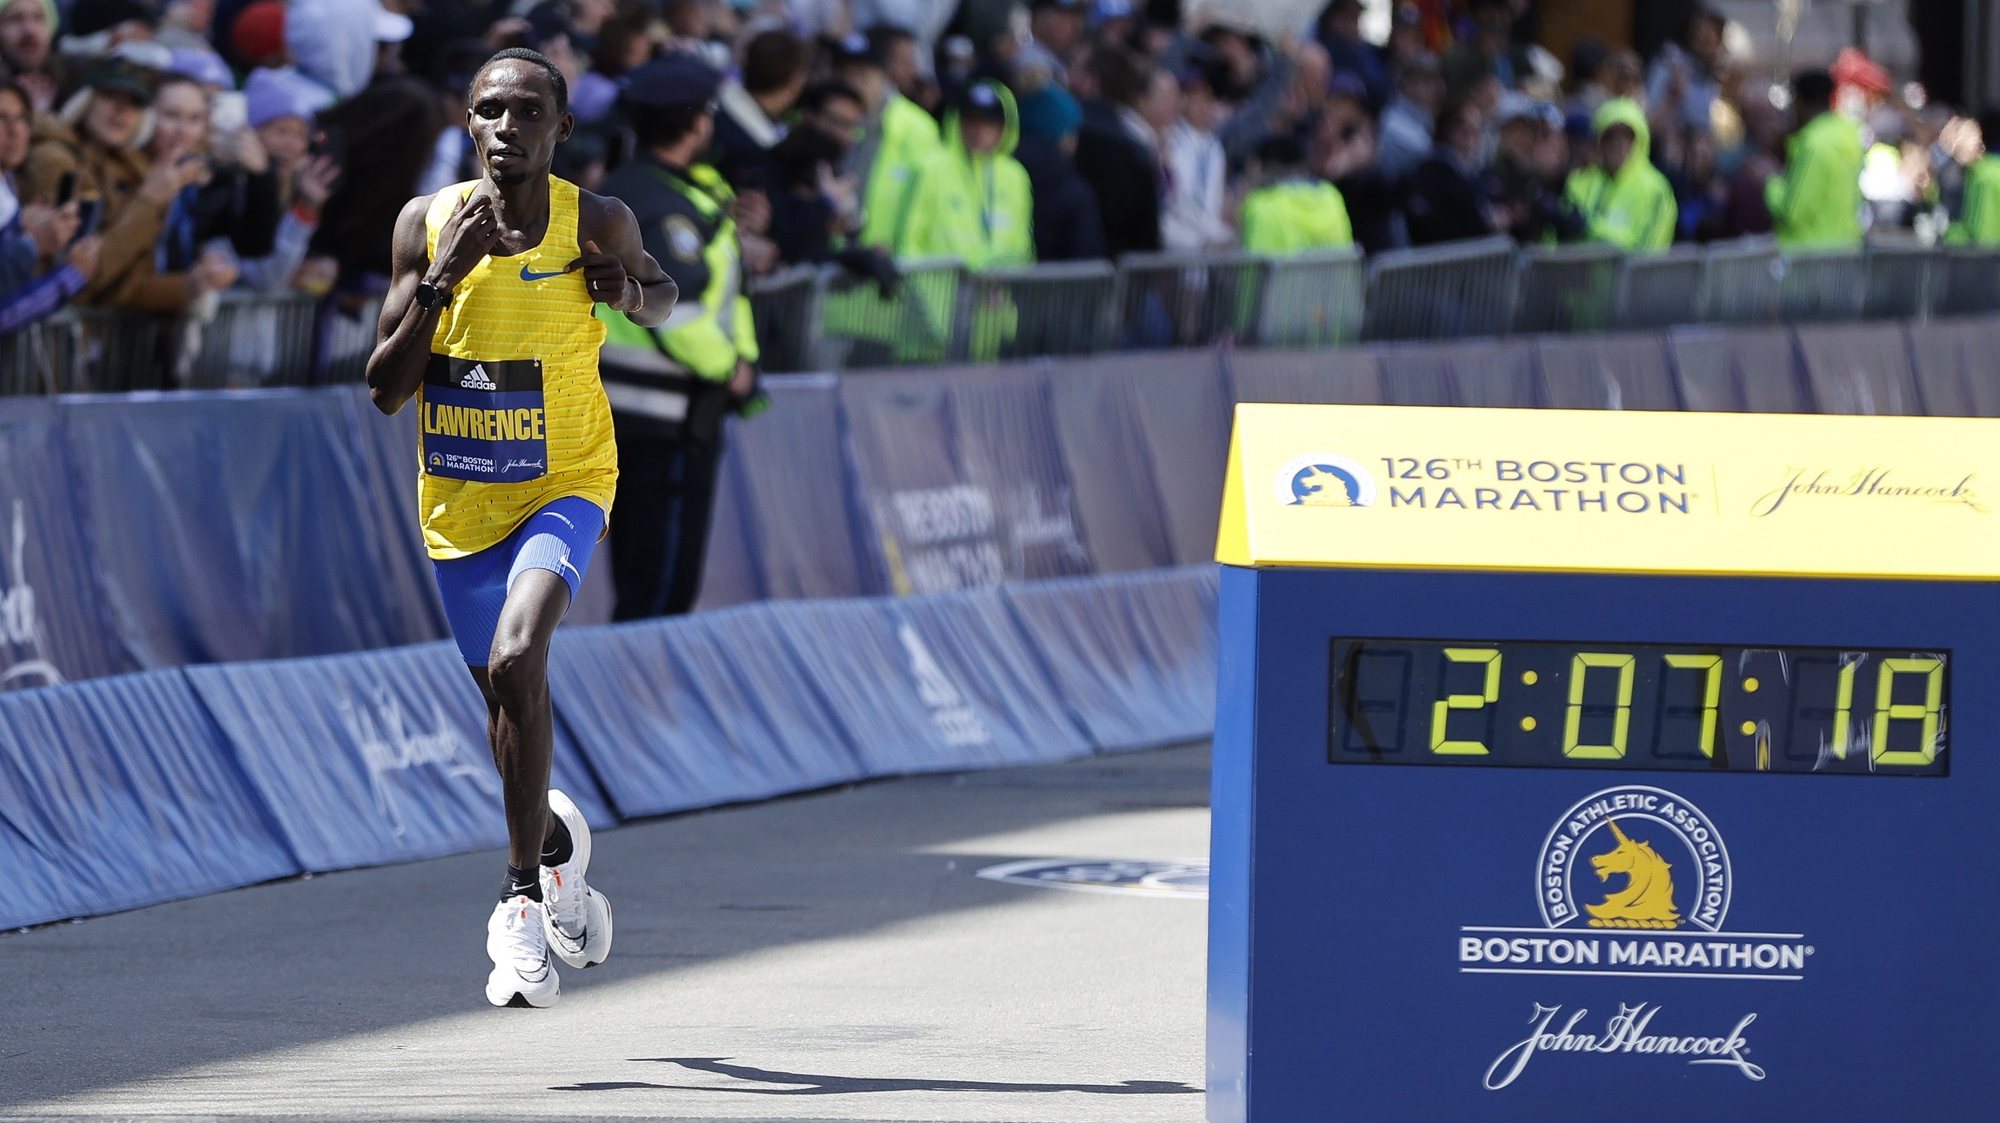 epa09896092 Lawrence Cherono of Kenya crosses the finish line to place second in the Men’s Division of the 126th Boston Marathon, in Boston, Massachusetts, USA, 18 April 2022. This is the first time since the beginning of the pandemic that the Boston Marathon, the worlds oldest annual marathon, was held on the traditional date in April.  EPA/CJ GUNTHER